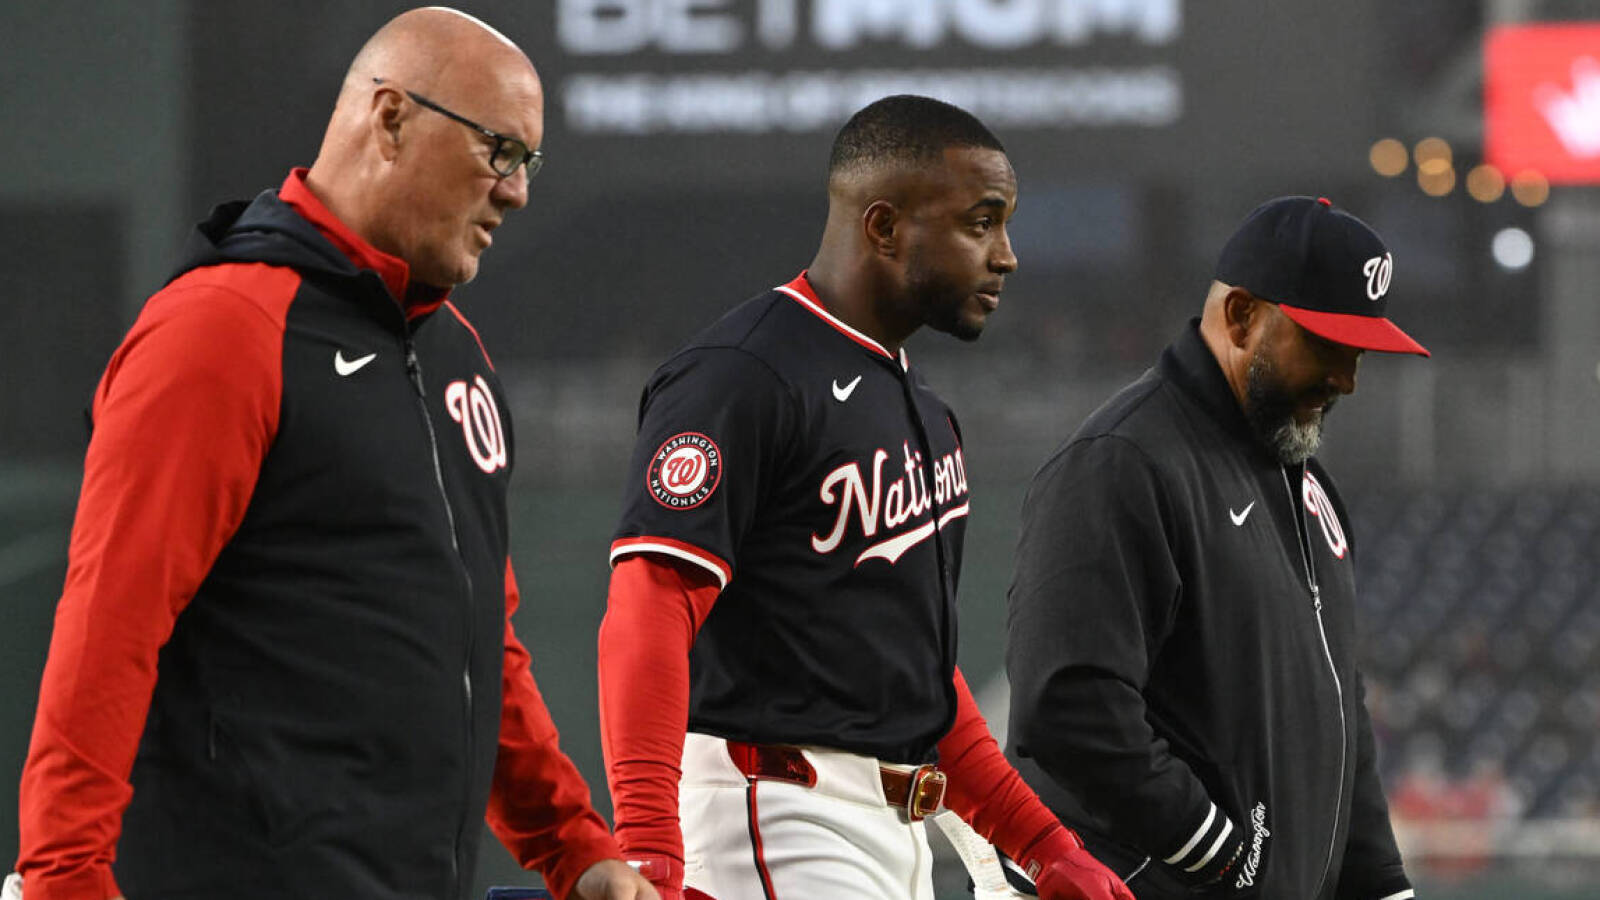 Victor Robles suffers left hamstring injury during game against Pirates